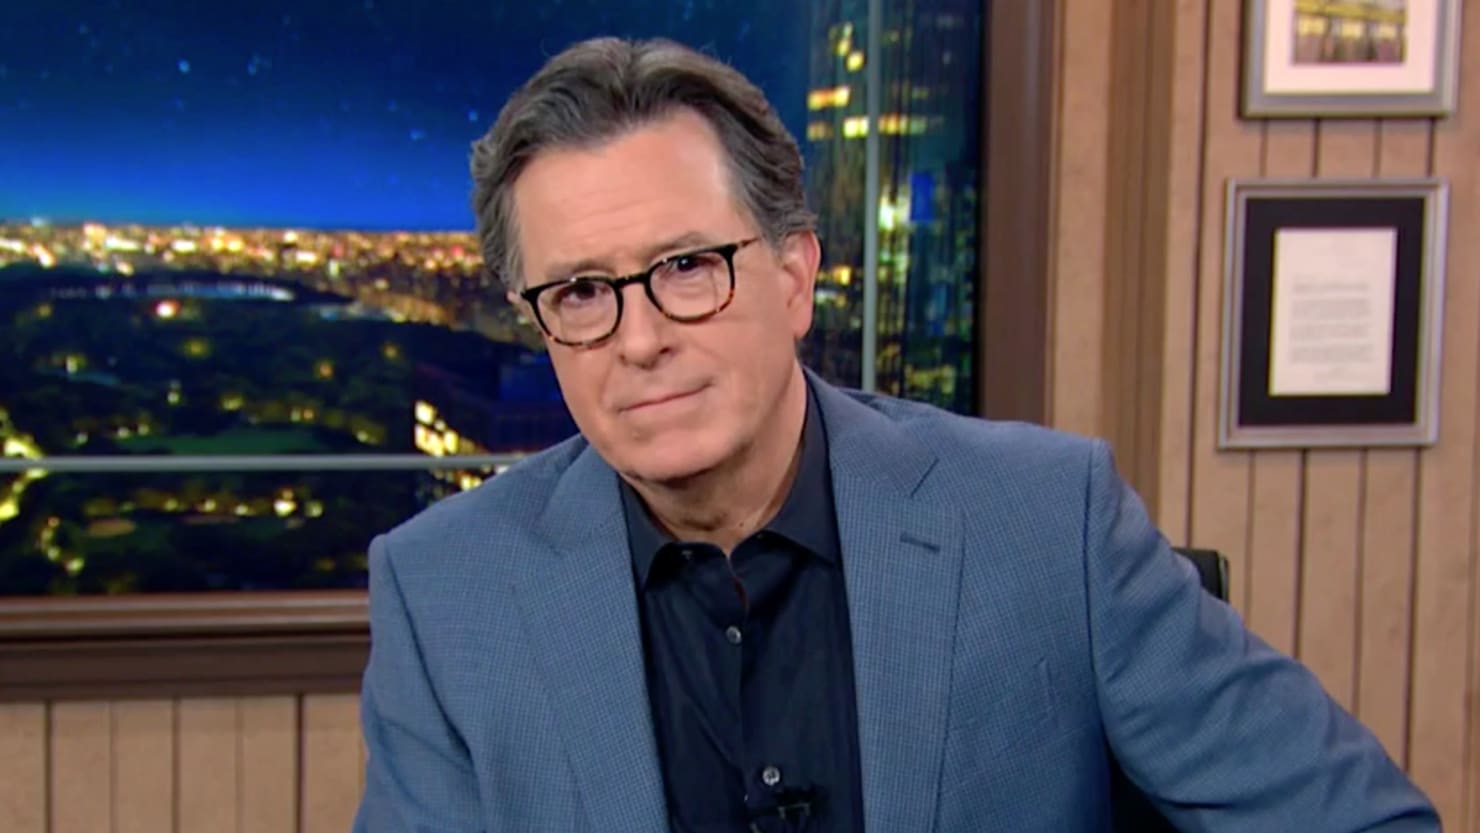 Stephen Colbert gets emotional about President Biden, says ‘I have no swim in me’